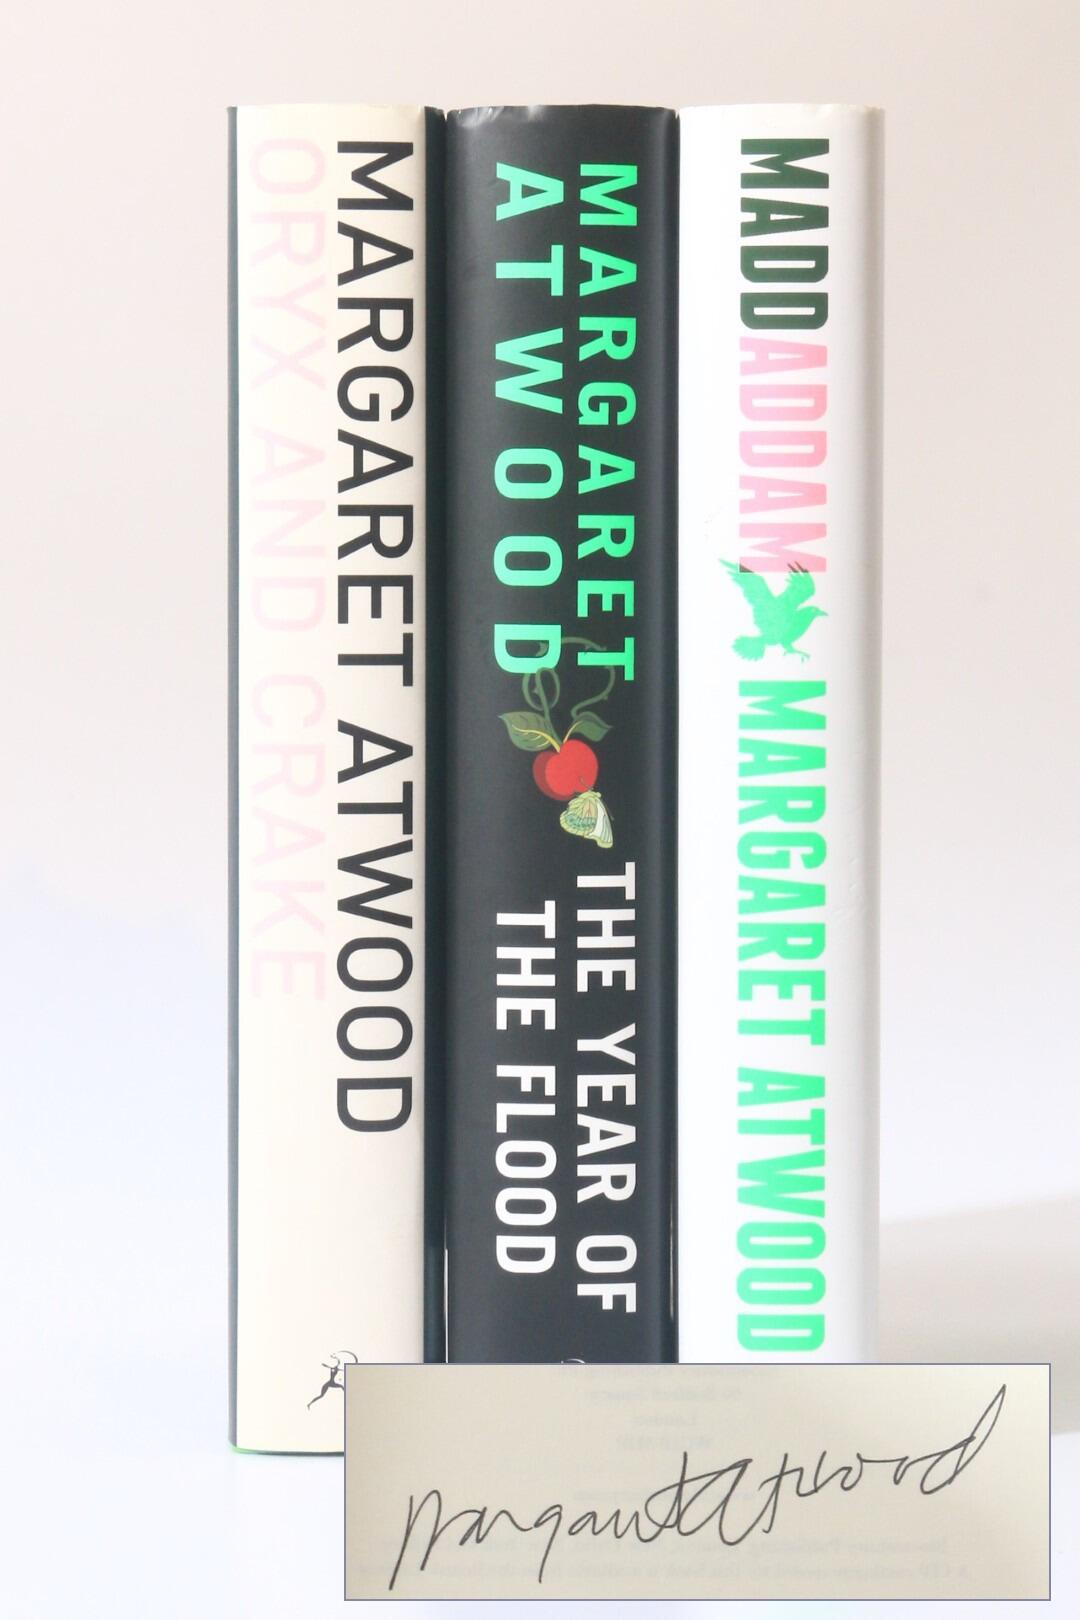 Margaret Atwood - The MaddAddam Trilogy [comprising] Oryx and Crake, The Year of the Flood and MaddAddam - Bloomsbury, 2003-2013, Signed First Editions.